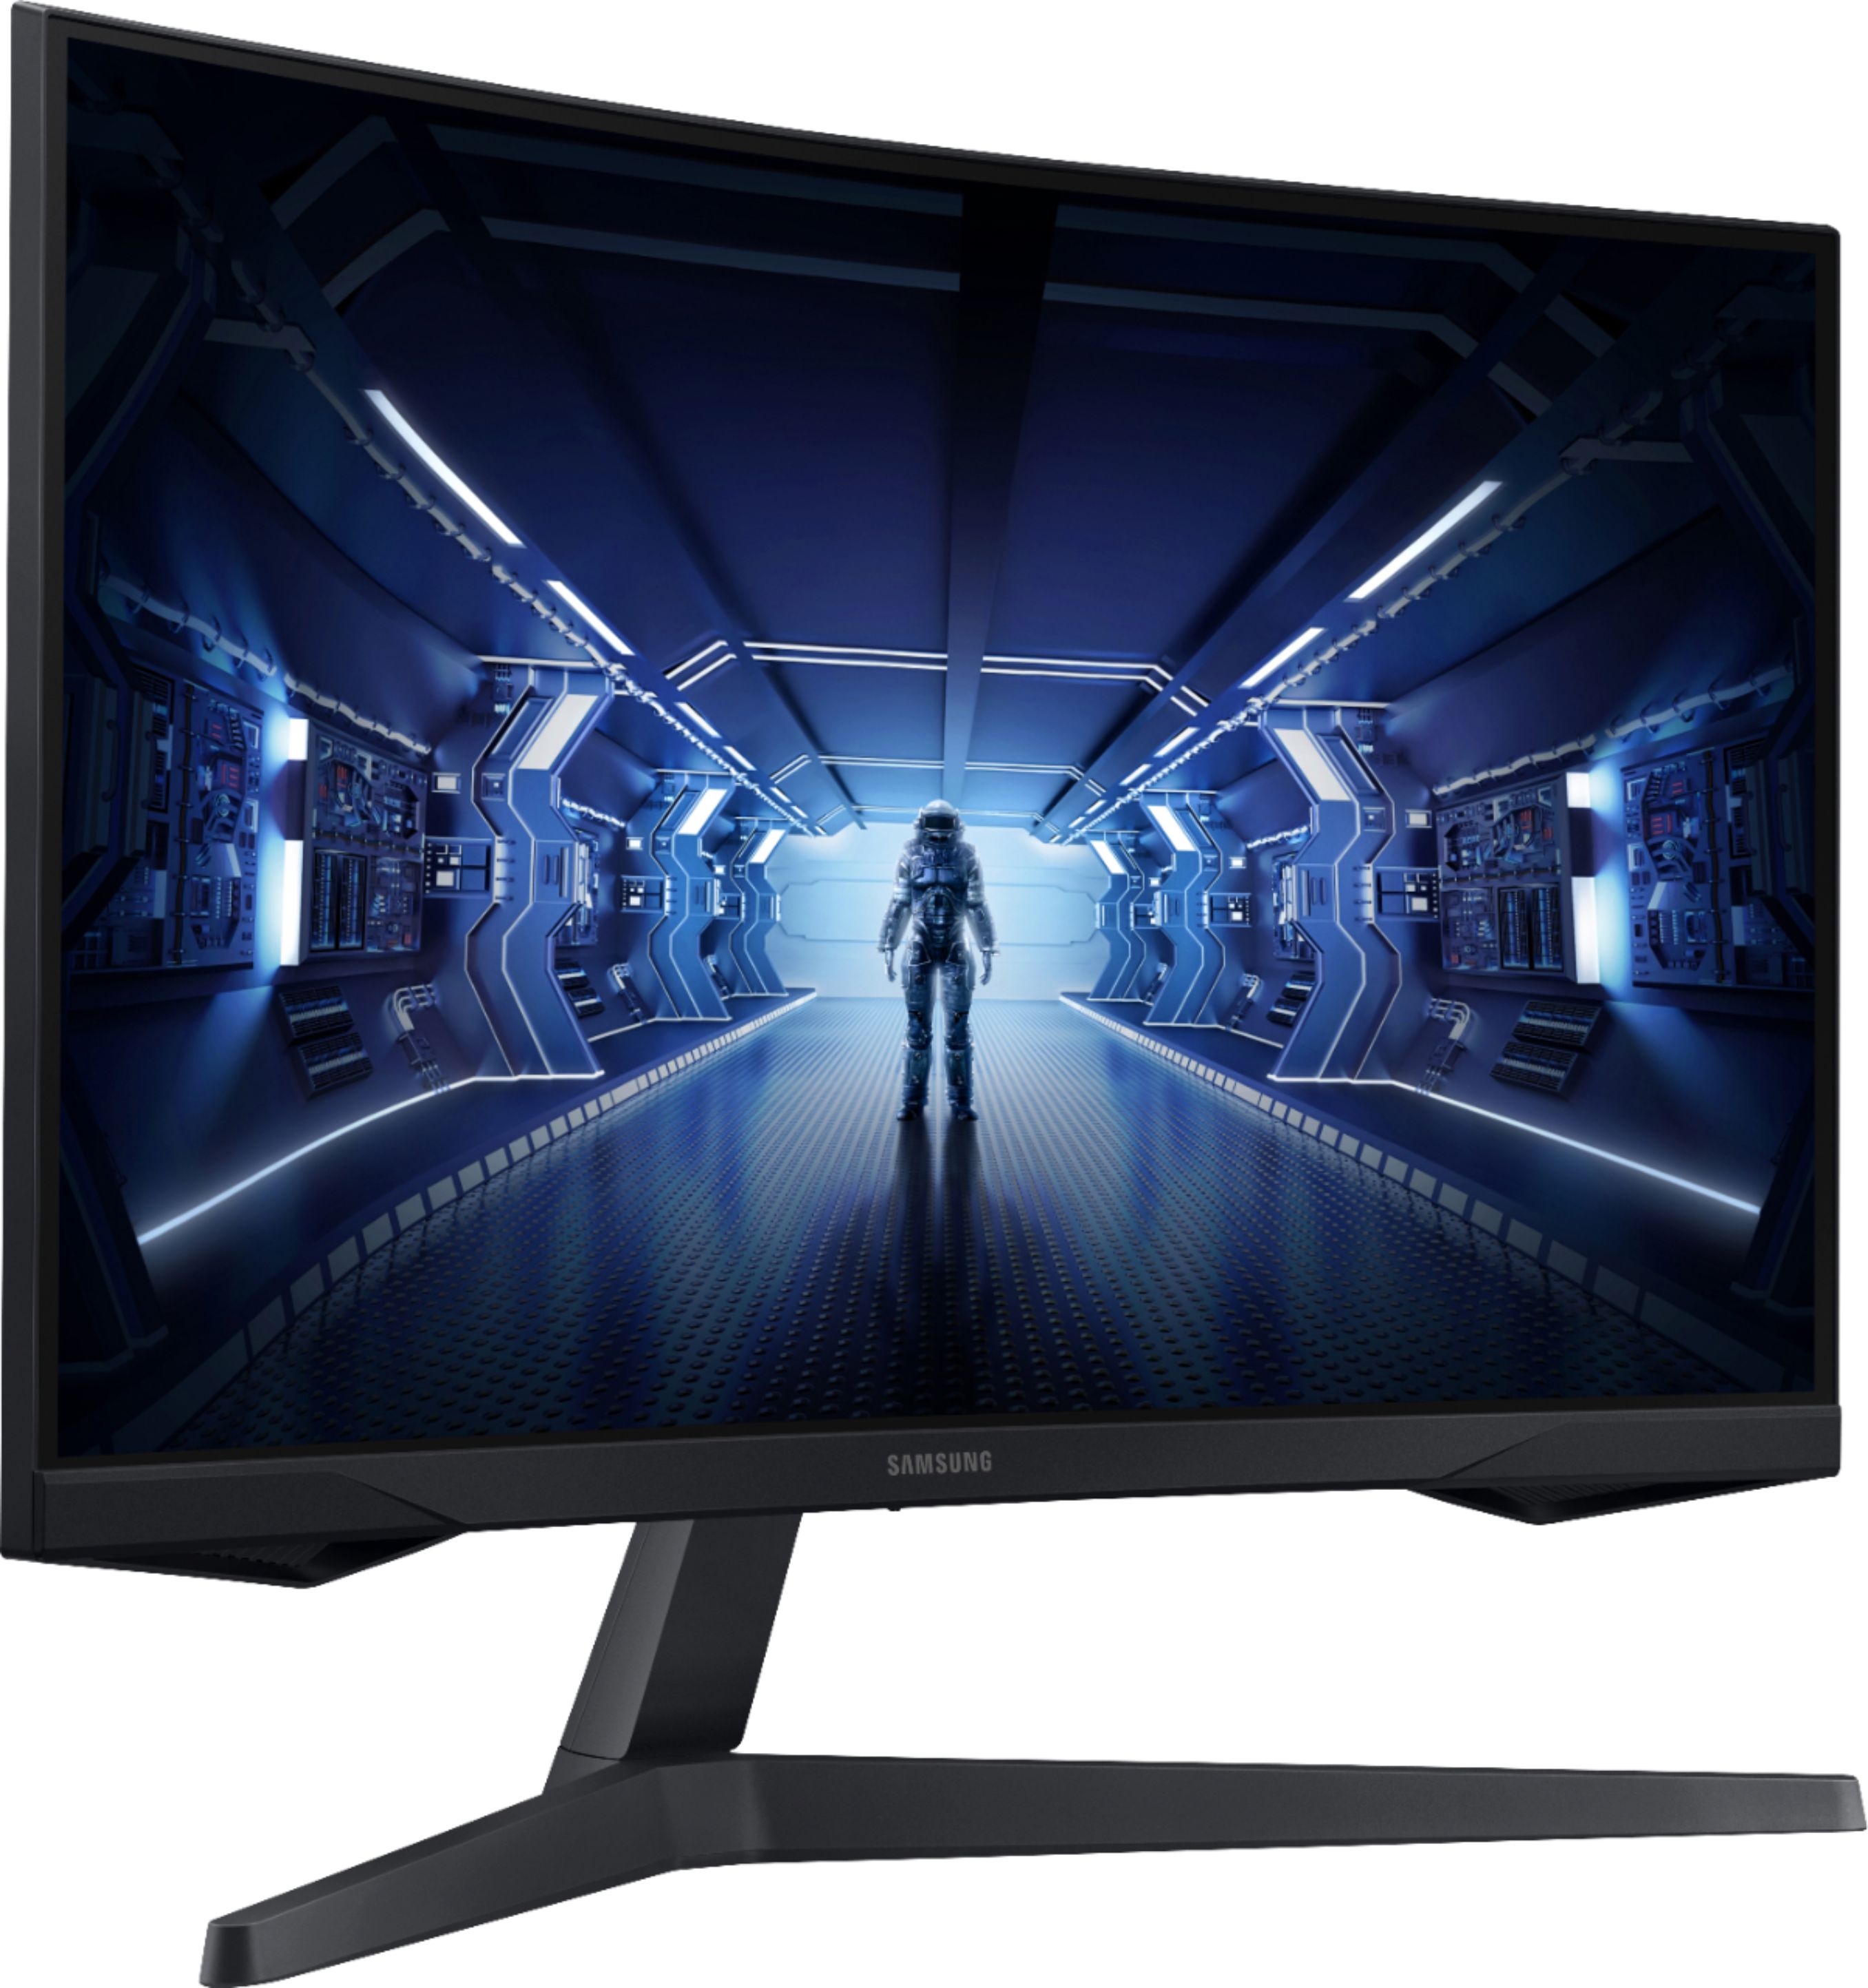 Angle View: Samsung - Geek Squad Certified Refurbished Odyssey G57 Series 32" LED Curved QHD FreeSync Premium Monitor with HDR - Black